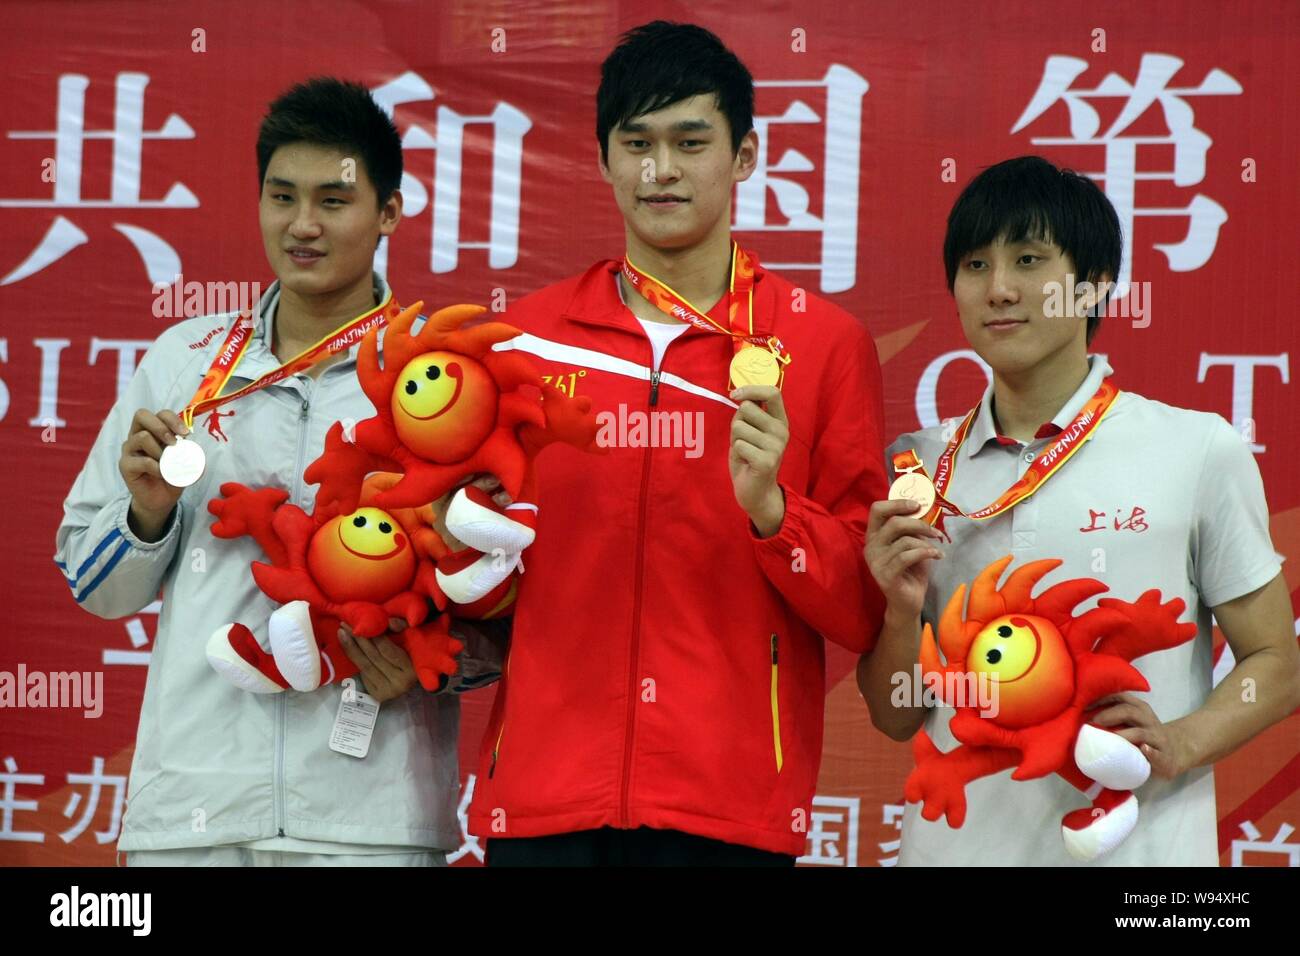 Gold medalist and Olympic swimming champion Sun Yang, center, poses with silver, left, and bronze medalists on the podium in the award ceremony for th Stock Photo